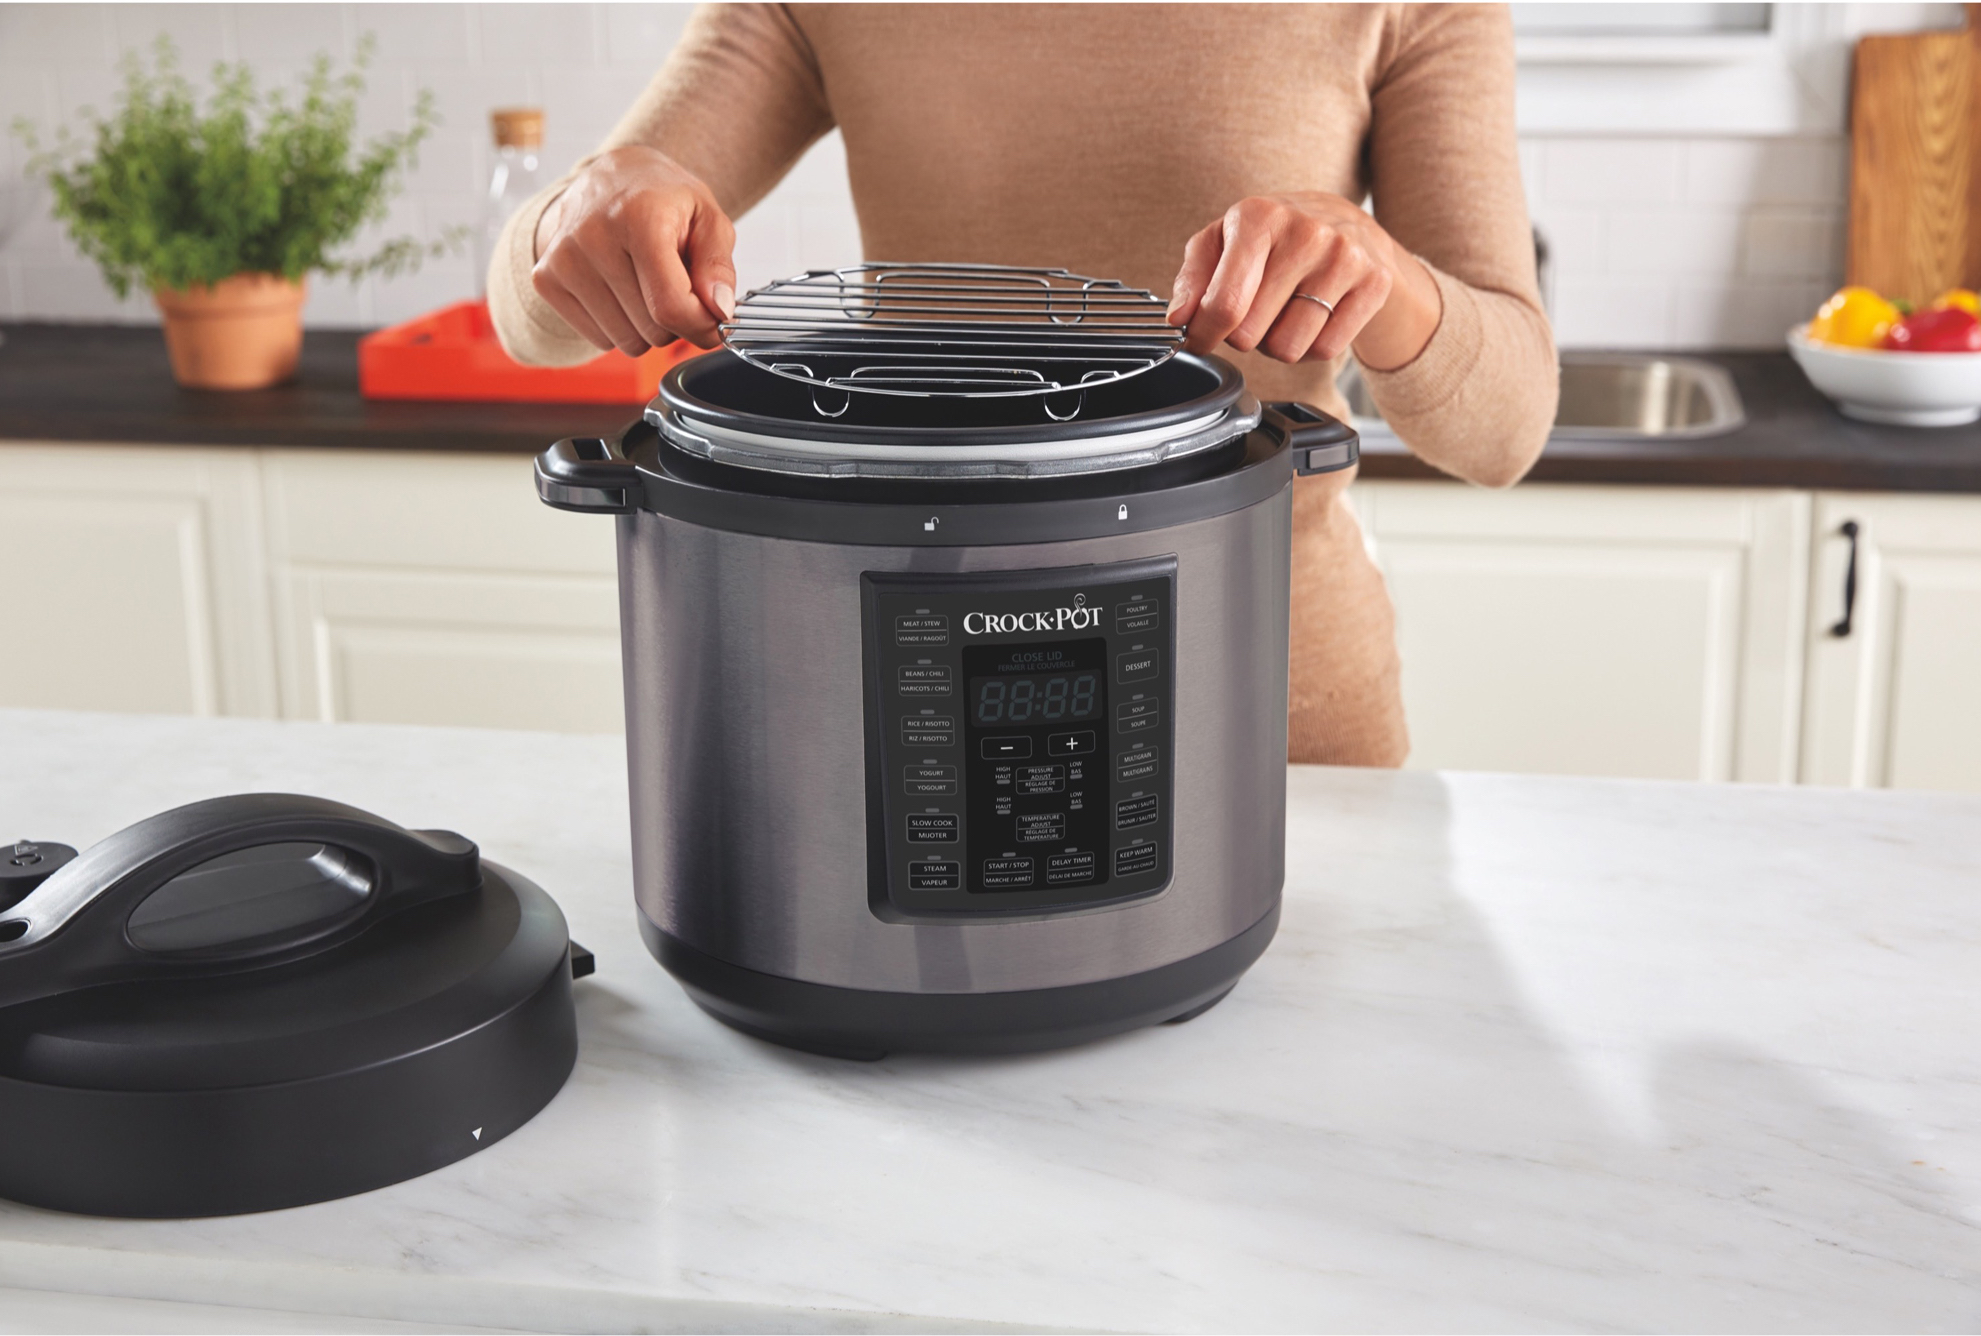 Crock-Pot 6 Qt 8-in-1 Multi-Use Express Crock Programmable Pressure Cooker, Slow Cooker, Sauté, and Steamer, Black Stainless Steel - image 2 of 10